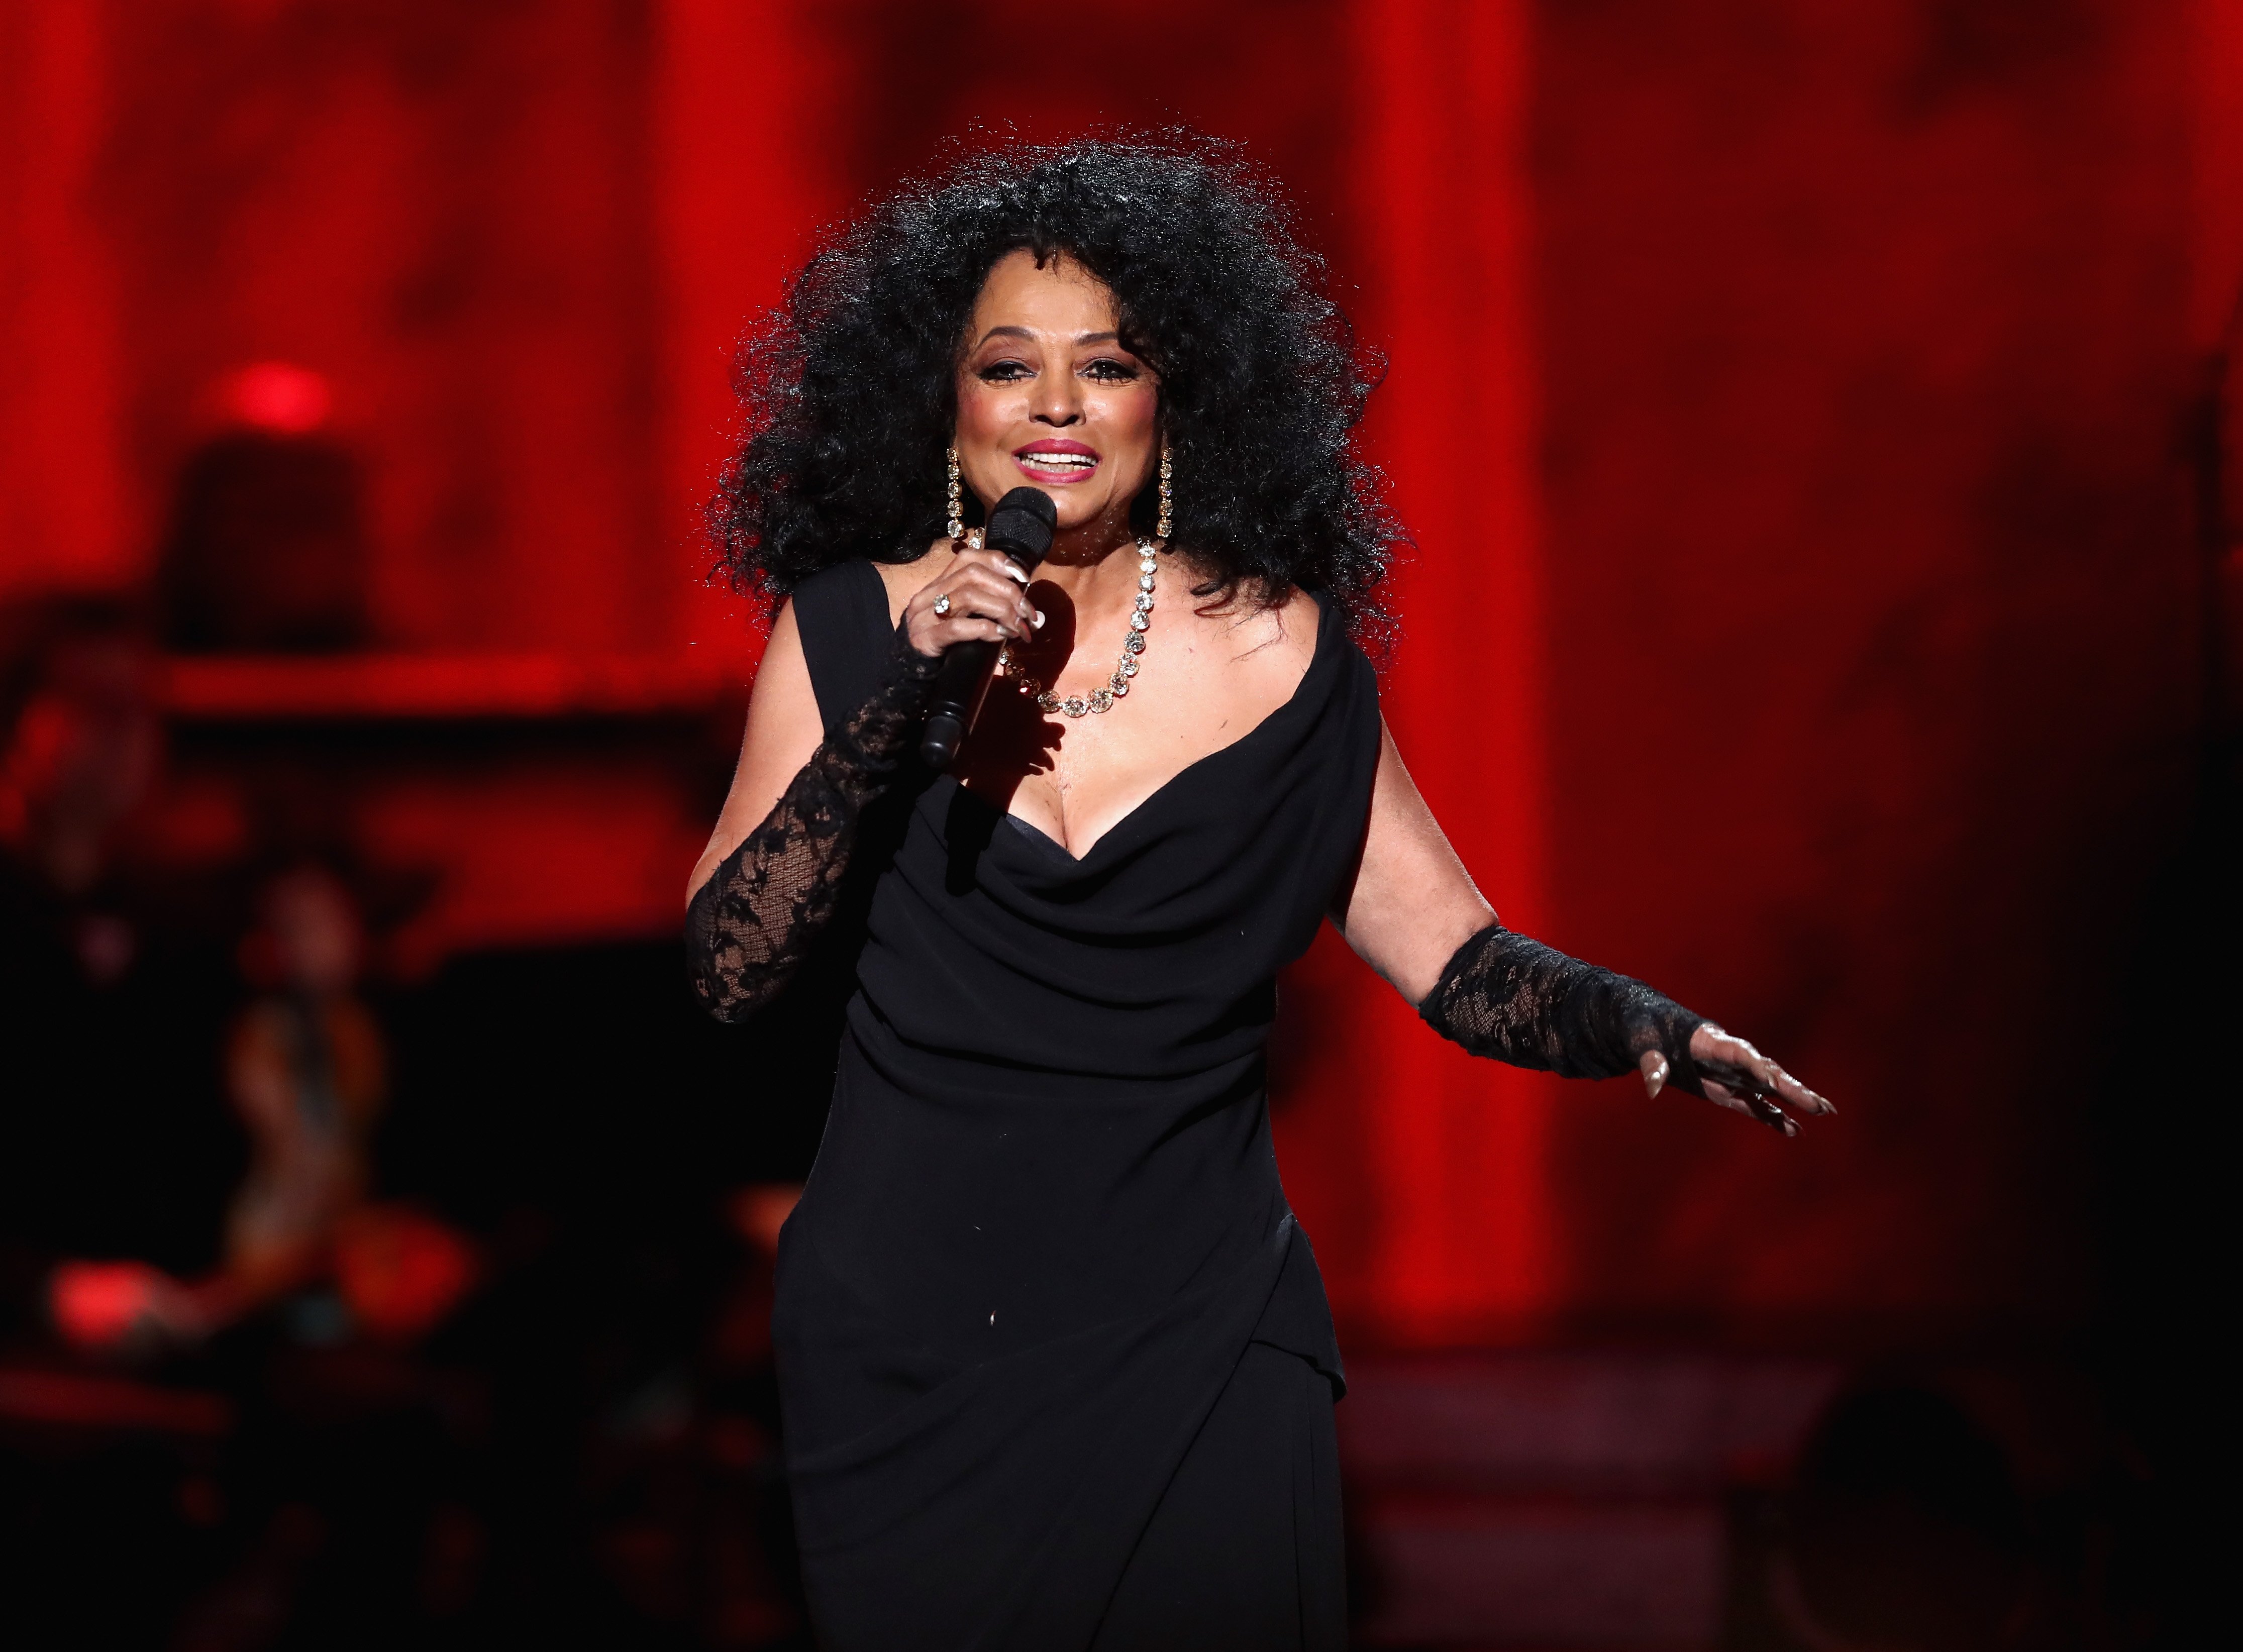 Diana Ross performs at the "Motown 60: A Grammy Celebration" at Microsoft Theater on February 12, 2019. | Photo: Getty Images